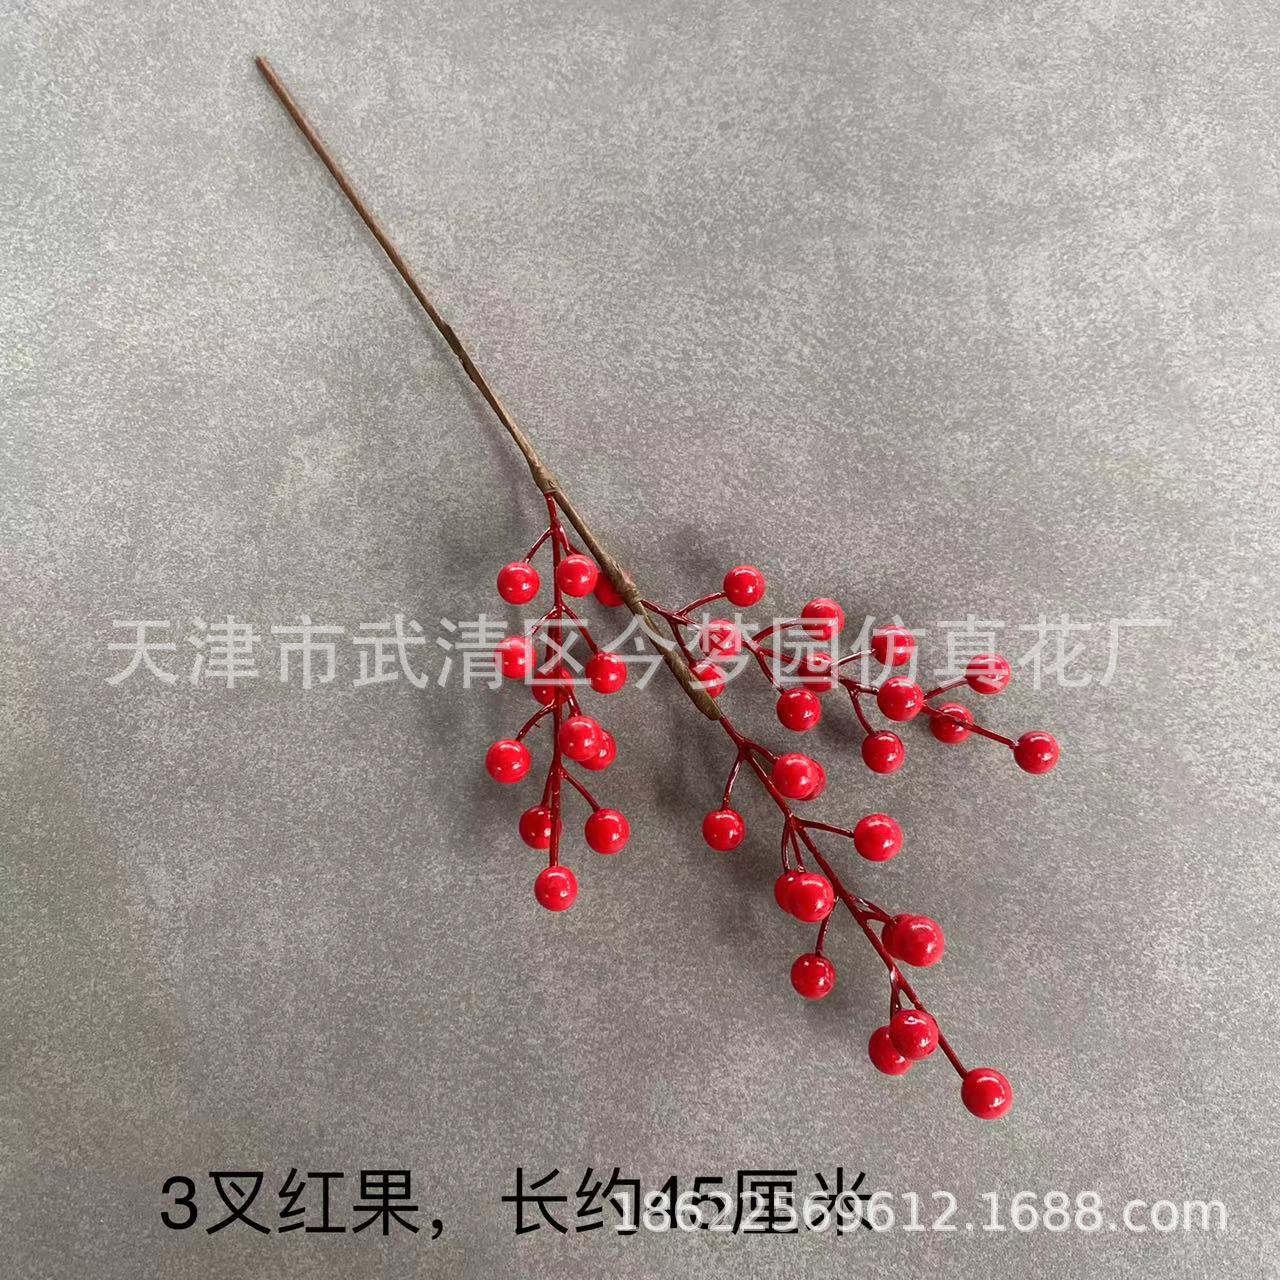 Wholesale Simulation Hollyberry Red Berry Fortune Fruit Home Decoration Blessing Bucket Decoration Gold Eucalyptus Small Fan